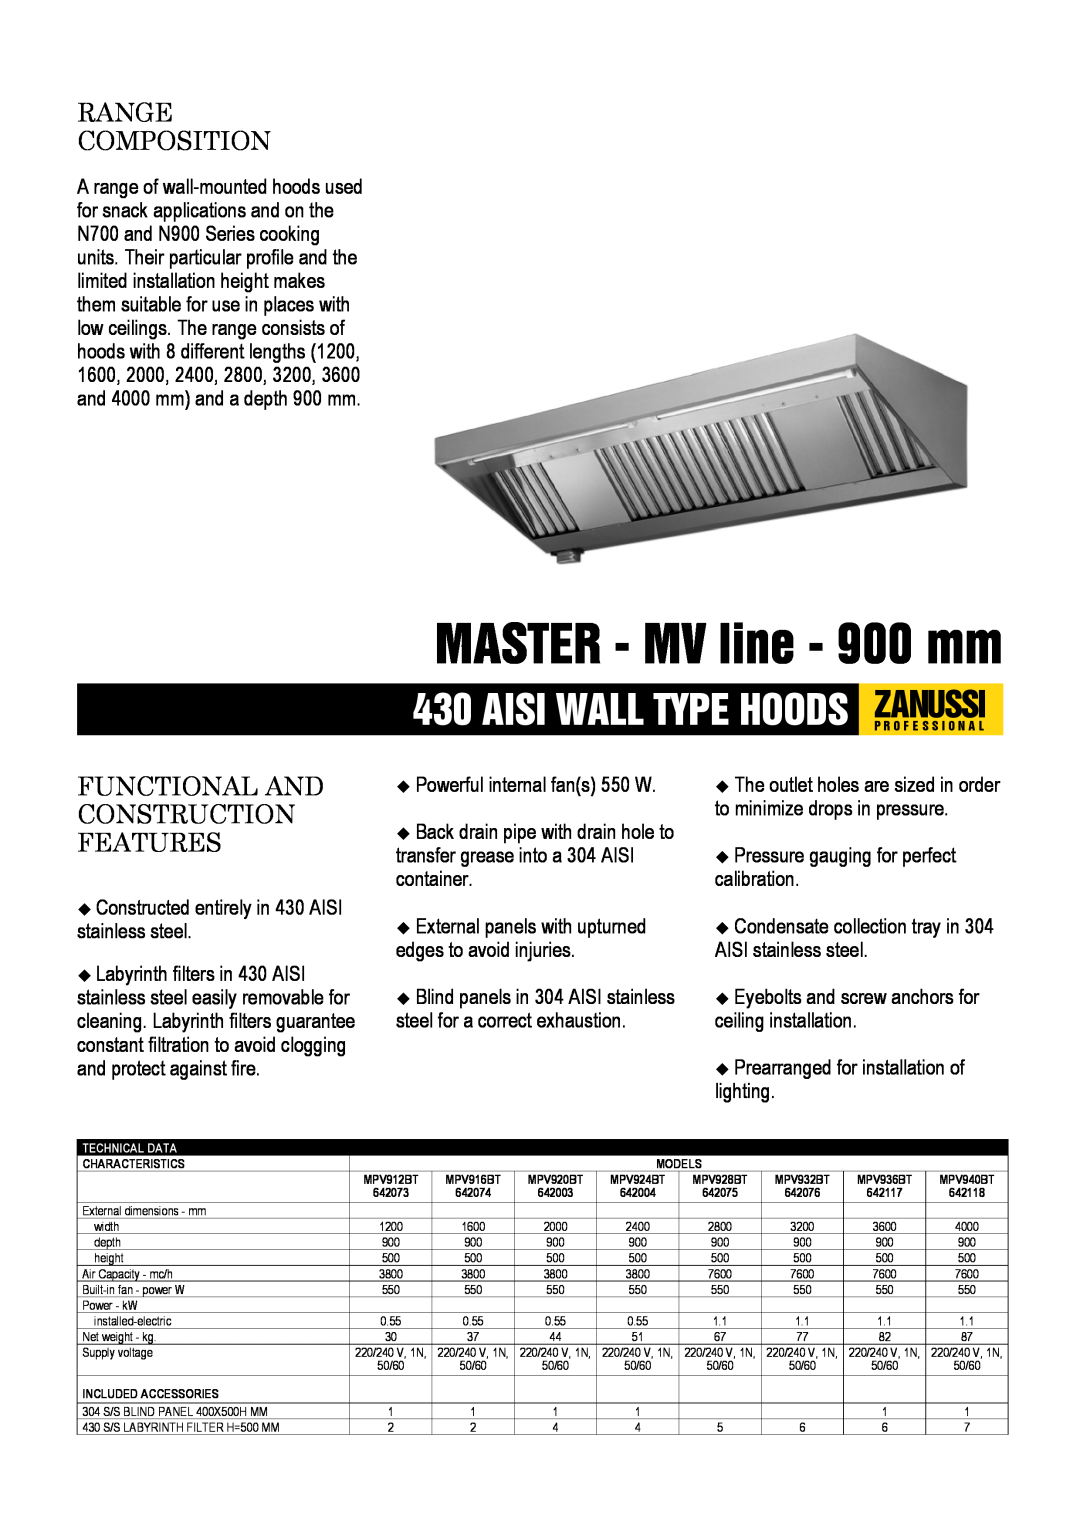 Zanussi 642117, 642118 dimensions MASTER - MV line - 900 mm, Range Composition, Functional And Construction Features 